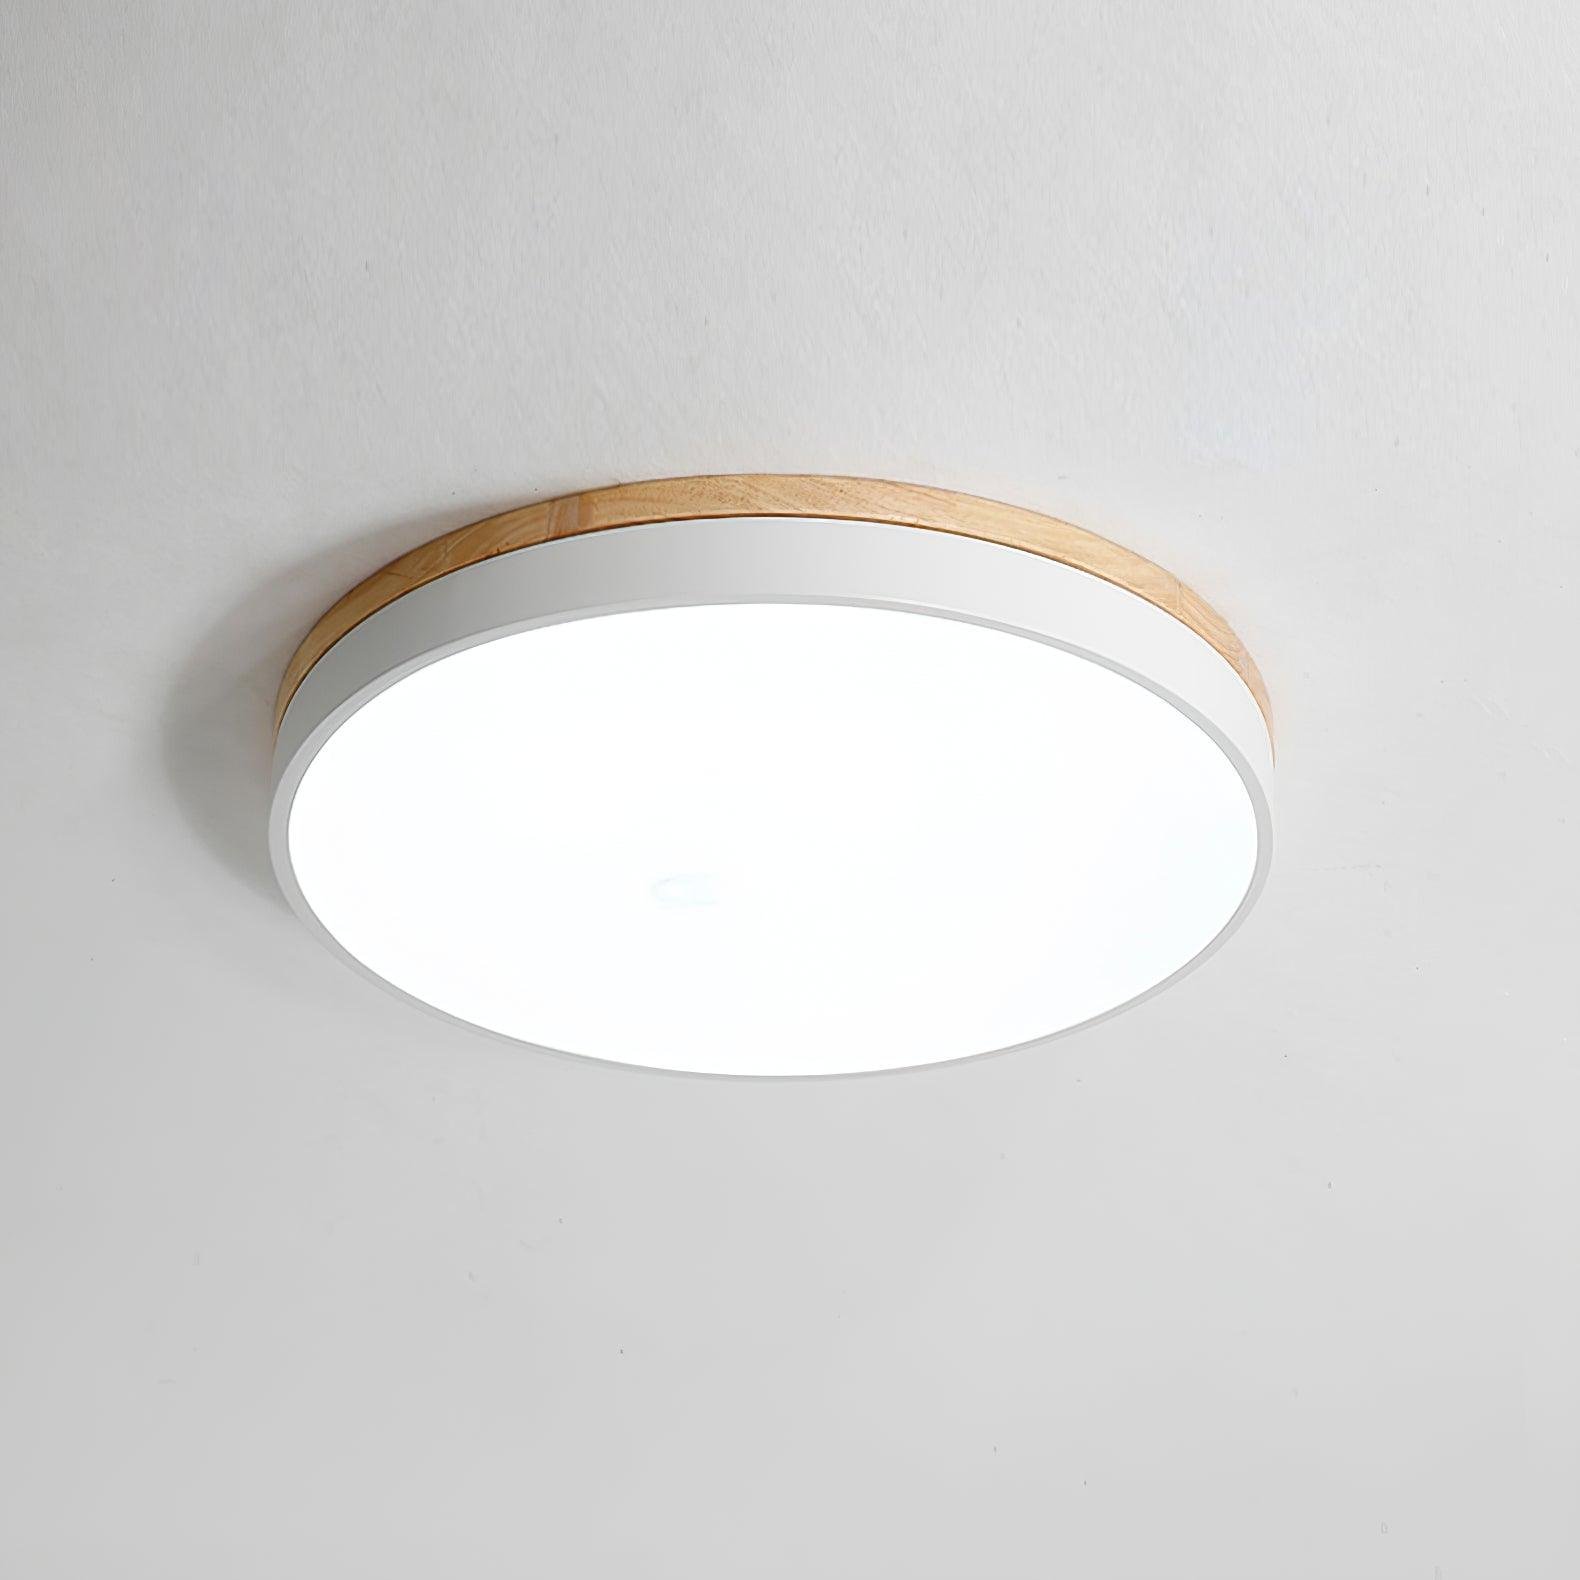 White Wooden Round Ceiling Lamp - Diameter 15.7" x Height 2.4" (40cm x 6cm), Wood and White Finish, Cool Lighting